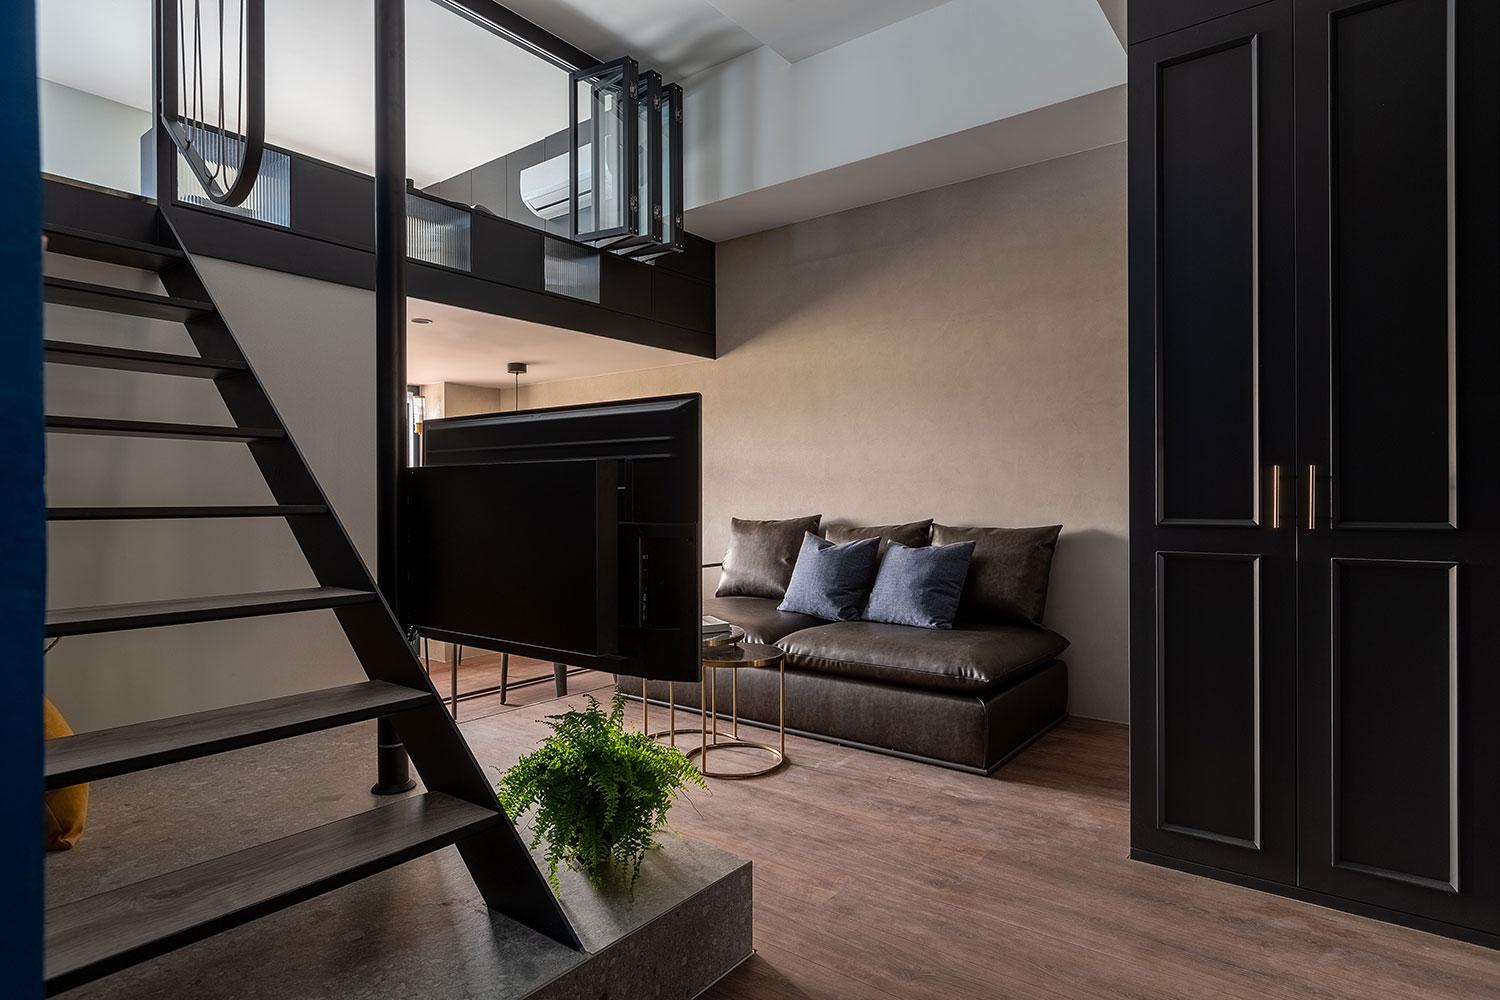 This Loft in Taipei Combines Industrial Design with French Elegance